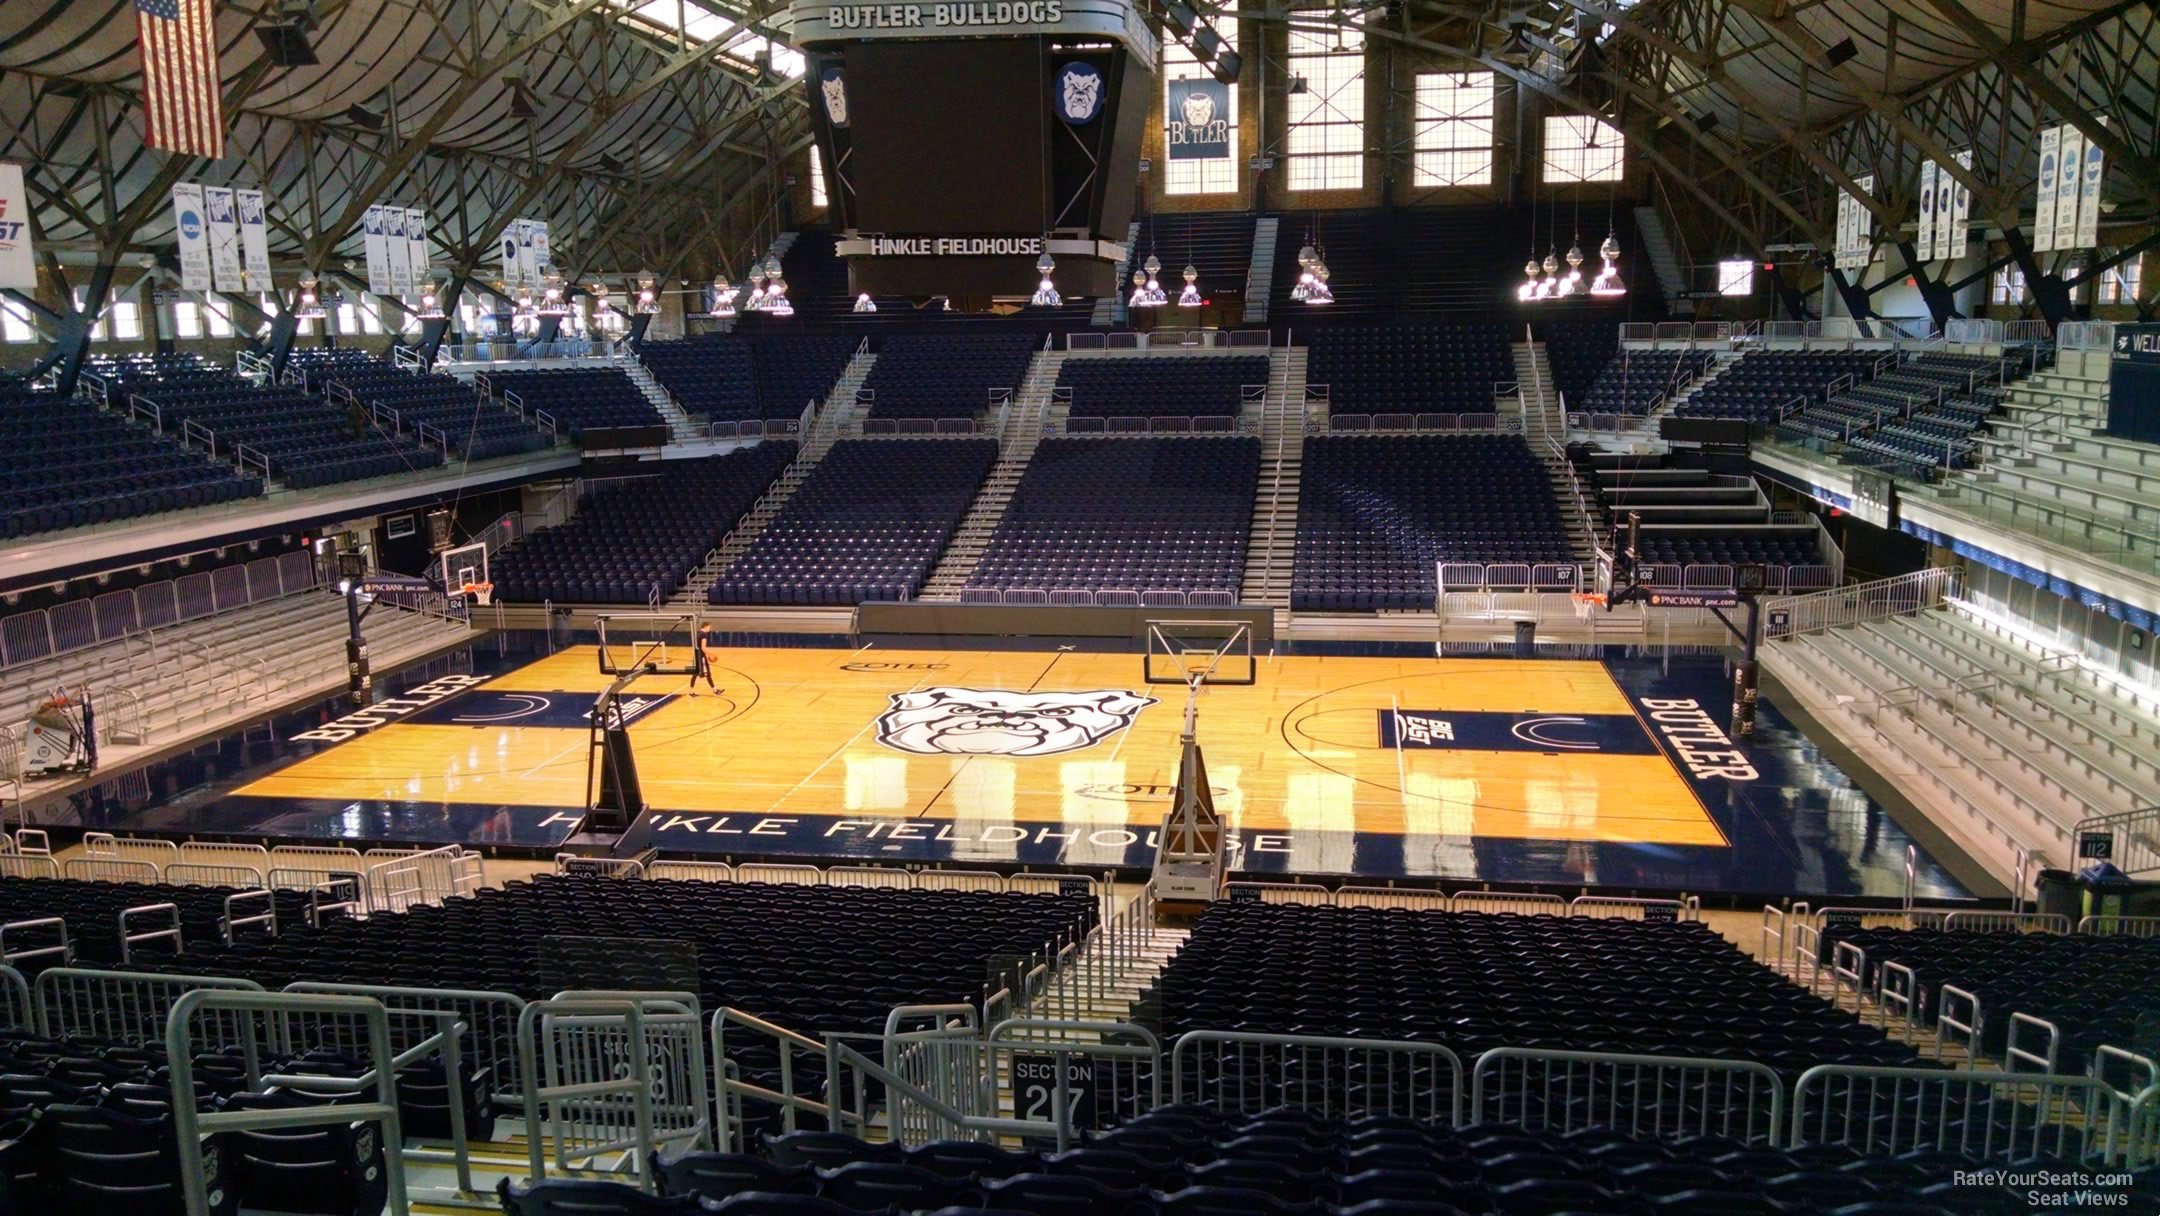 section 217, row 10 seat view  - hinkle fieldhouse